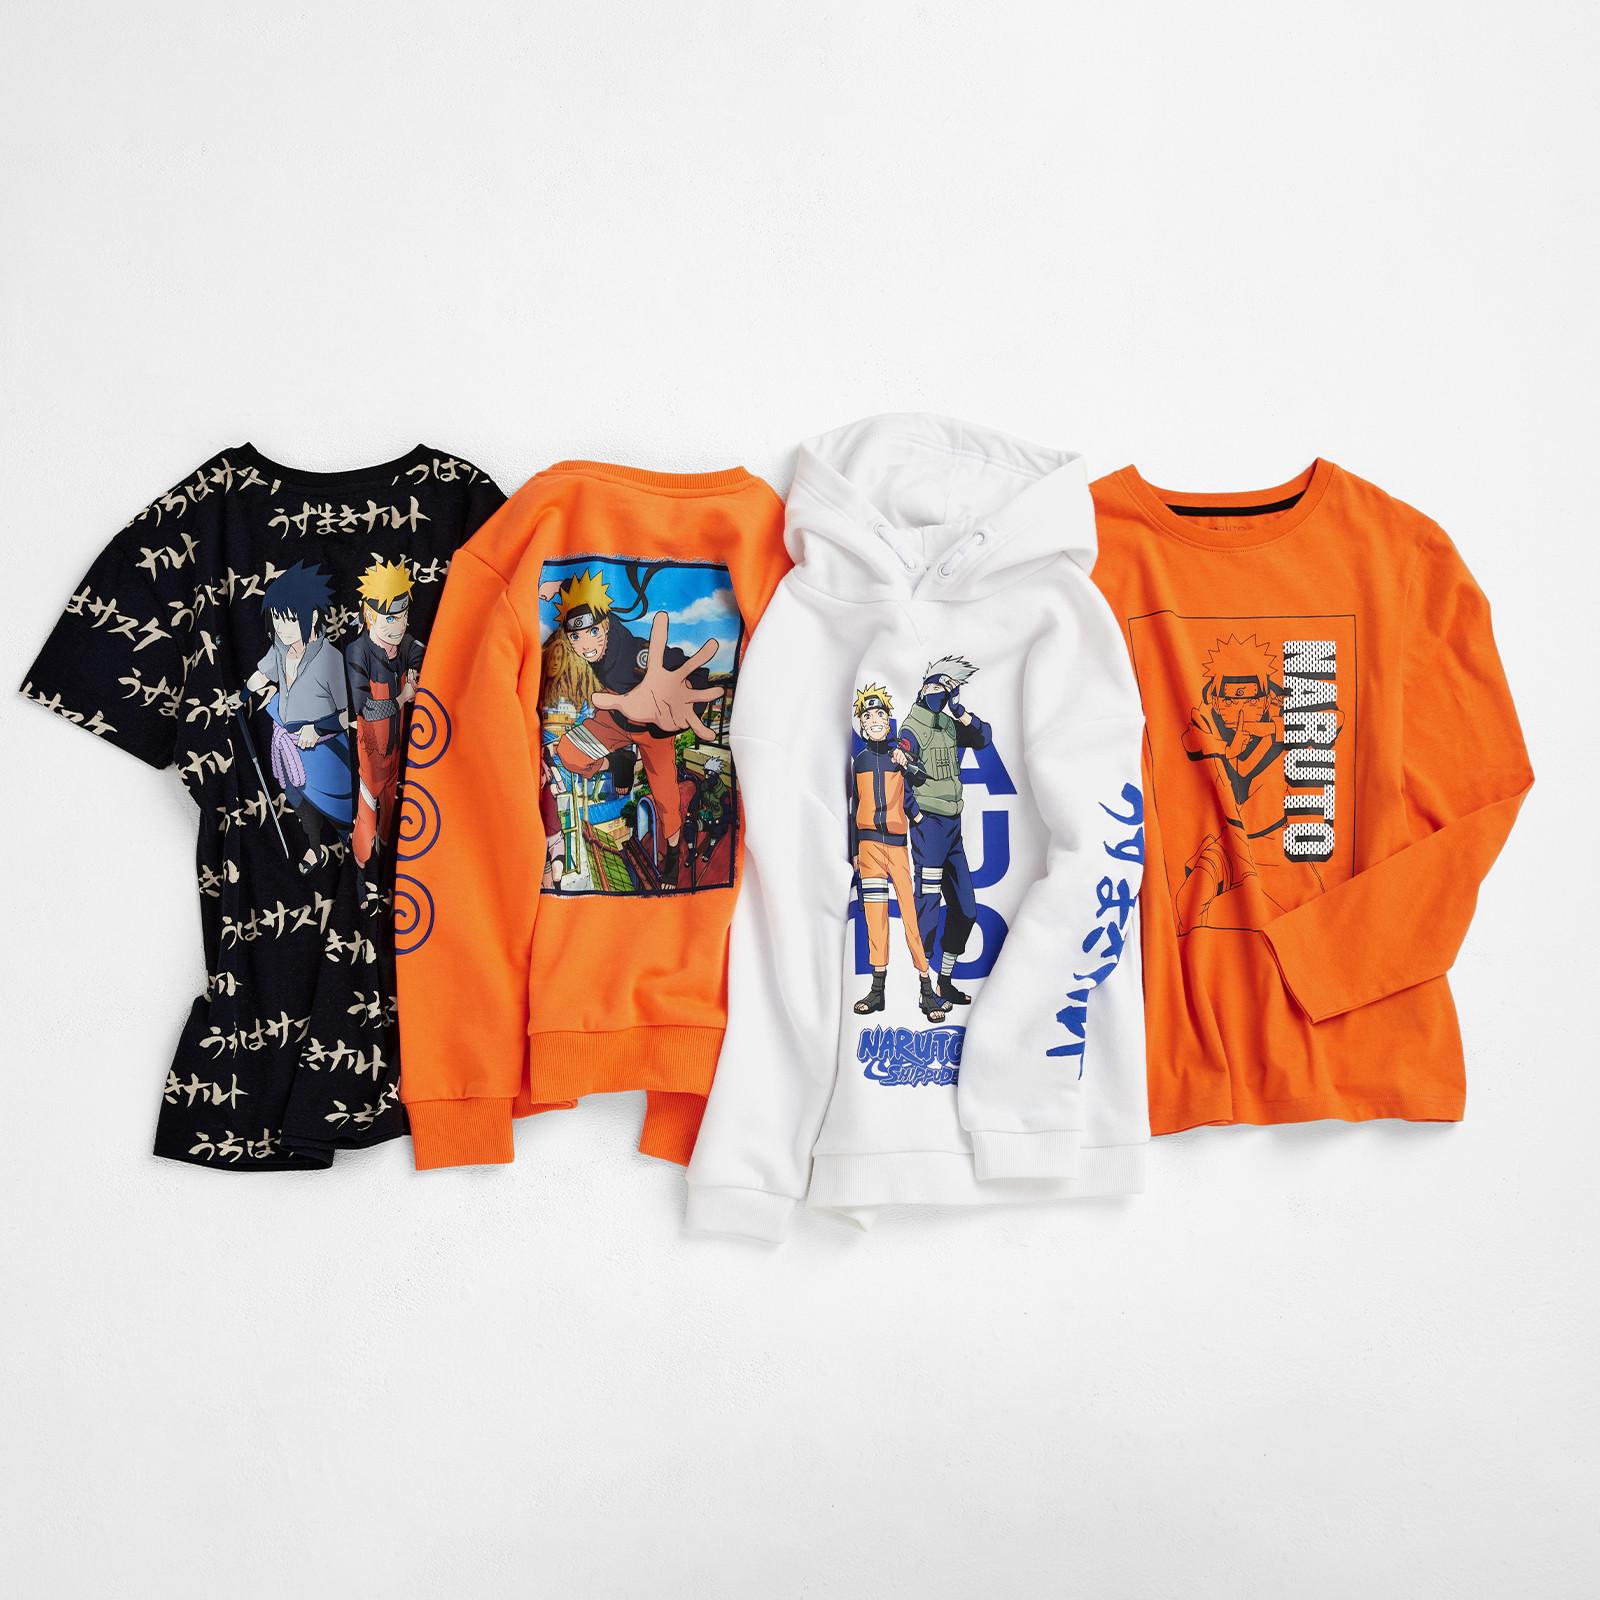 Our Naruto Kids Collection